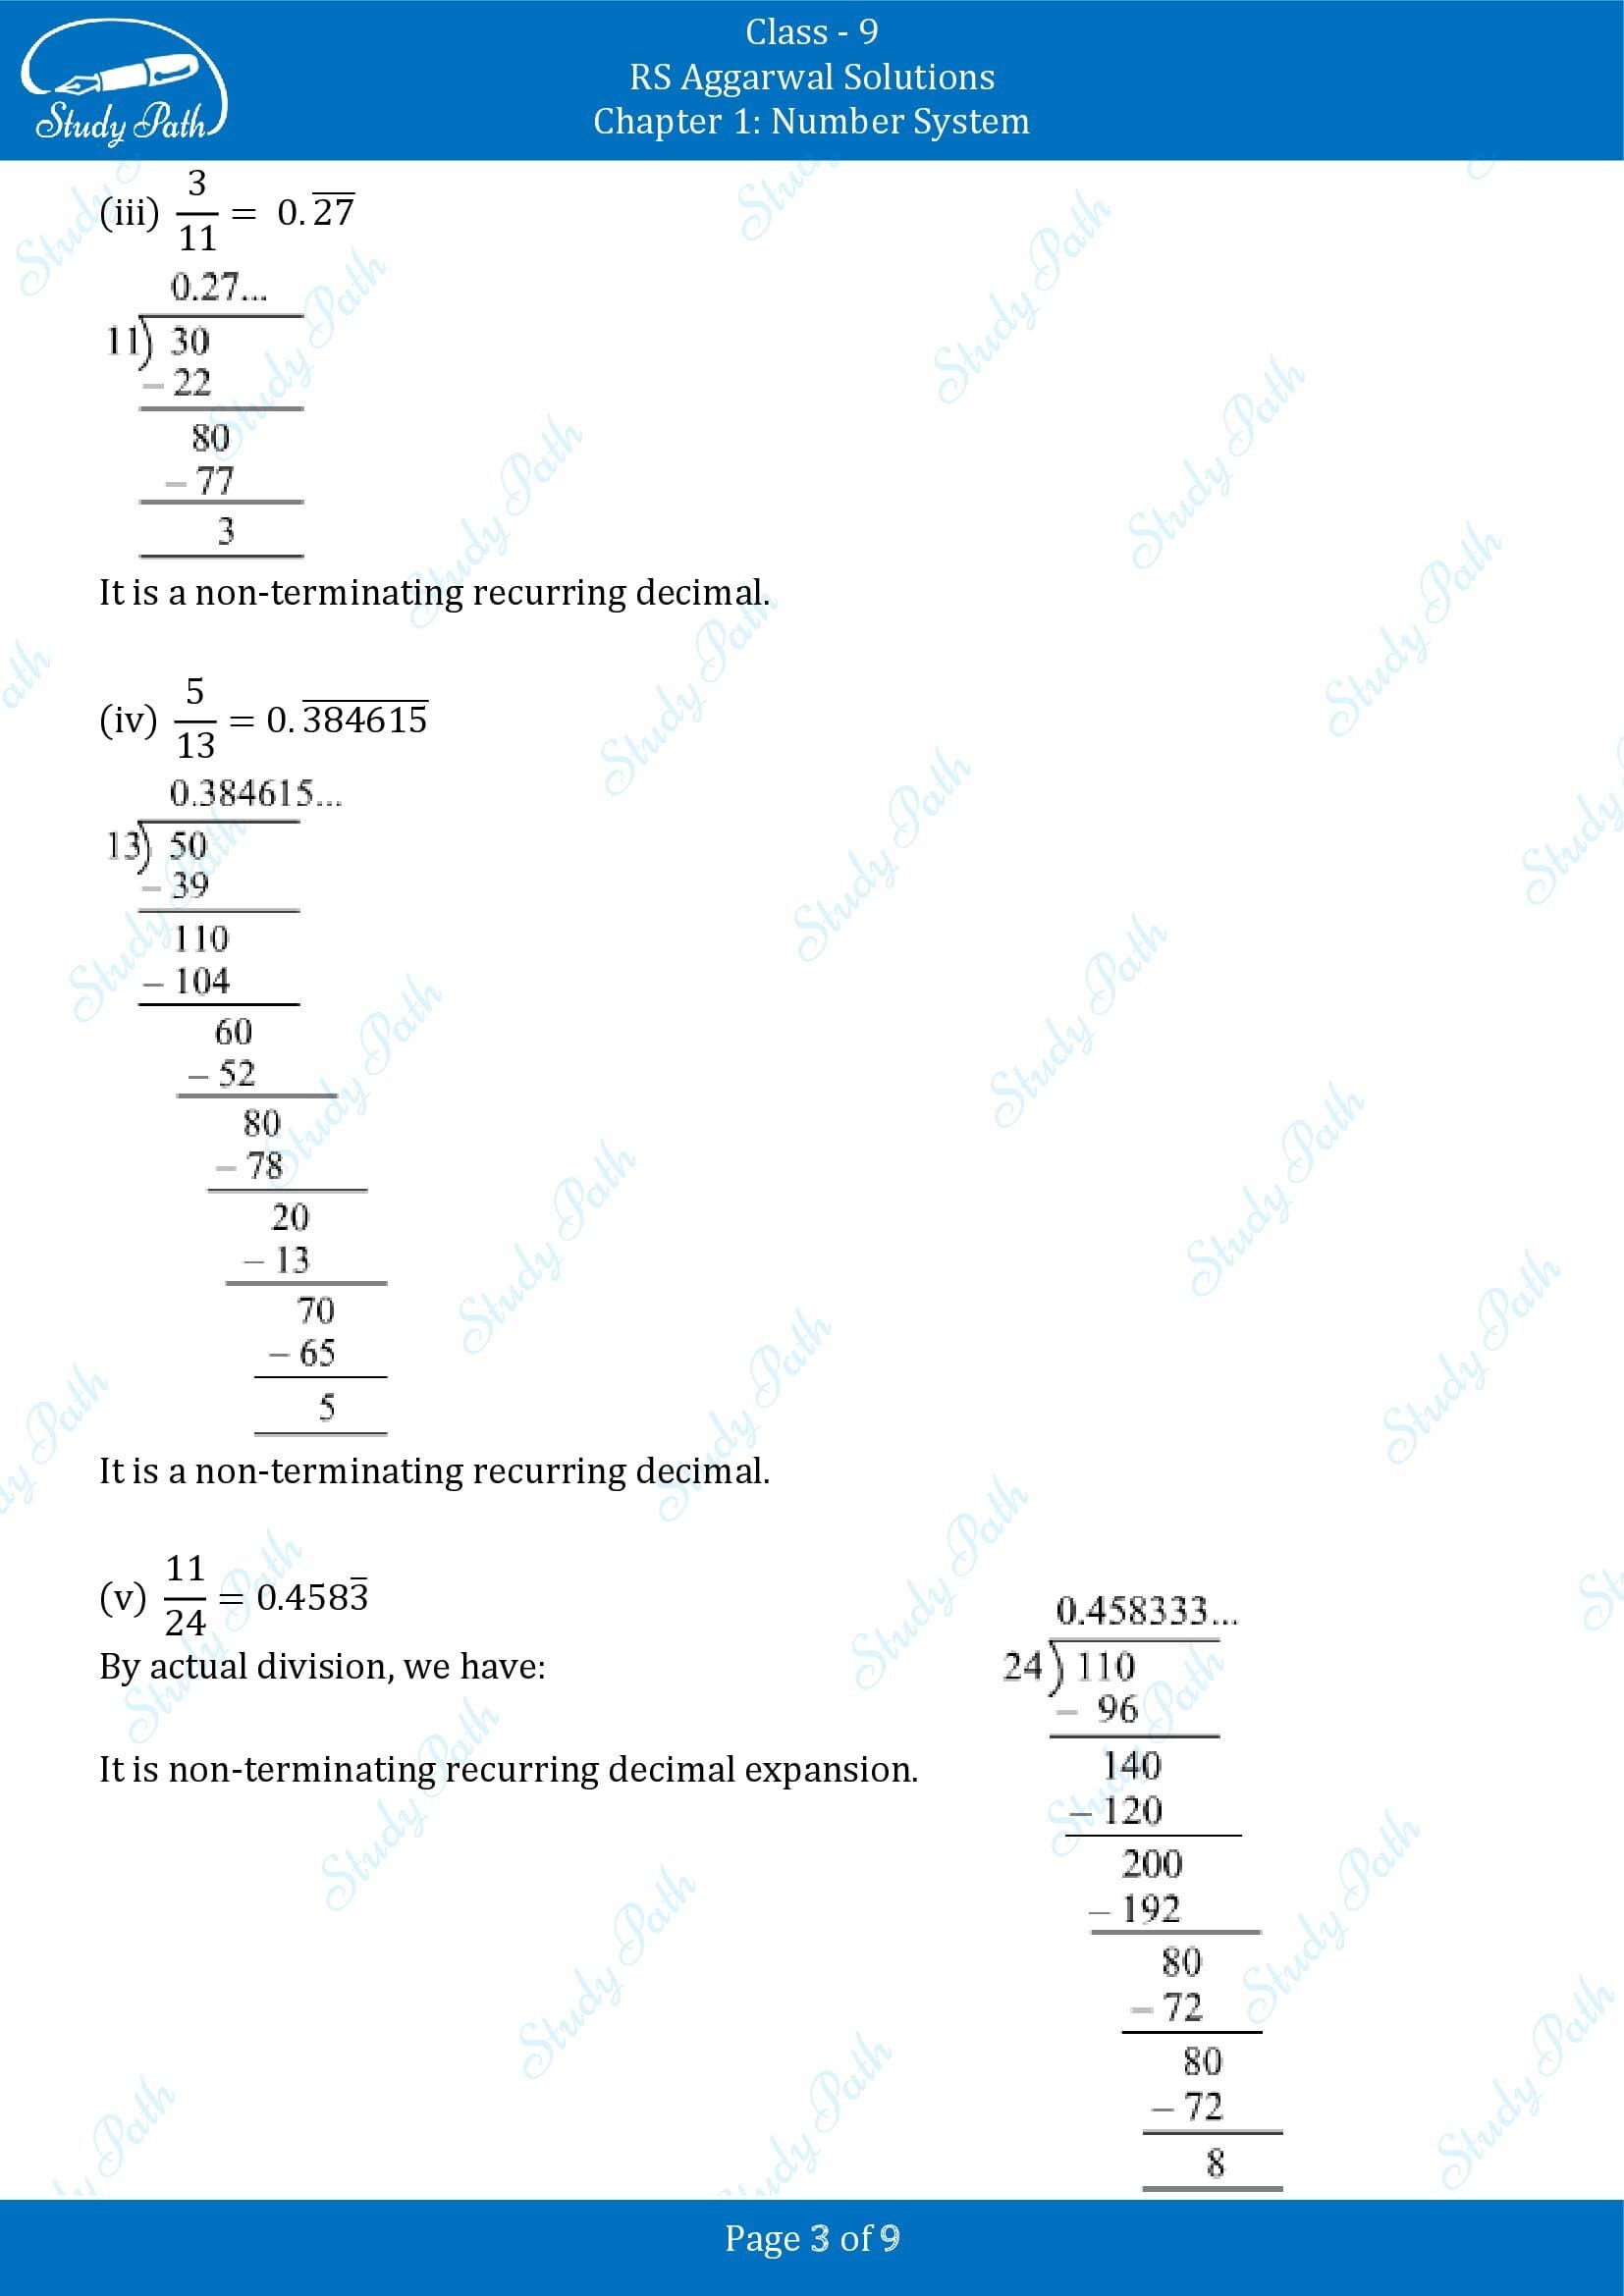 RS Aggarwal Solutions Class 9 Chapter 1 Number System Exercise 1B 00003